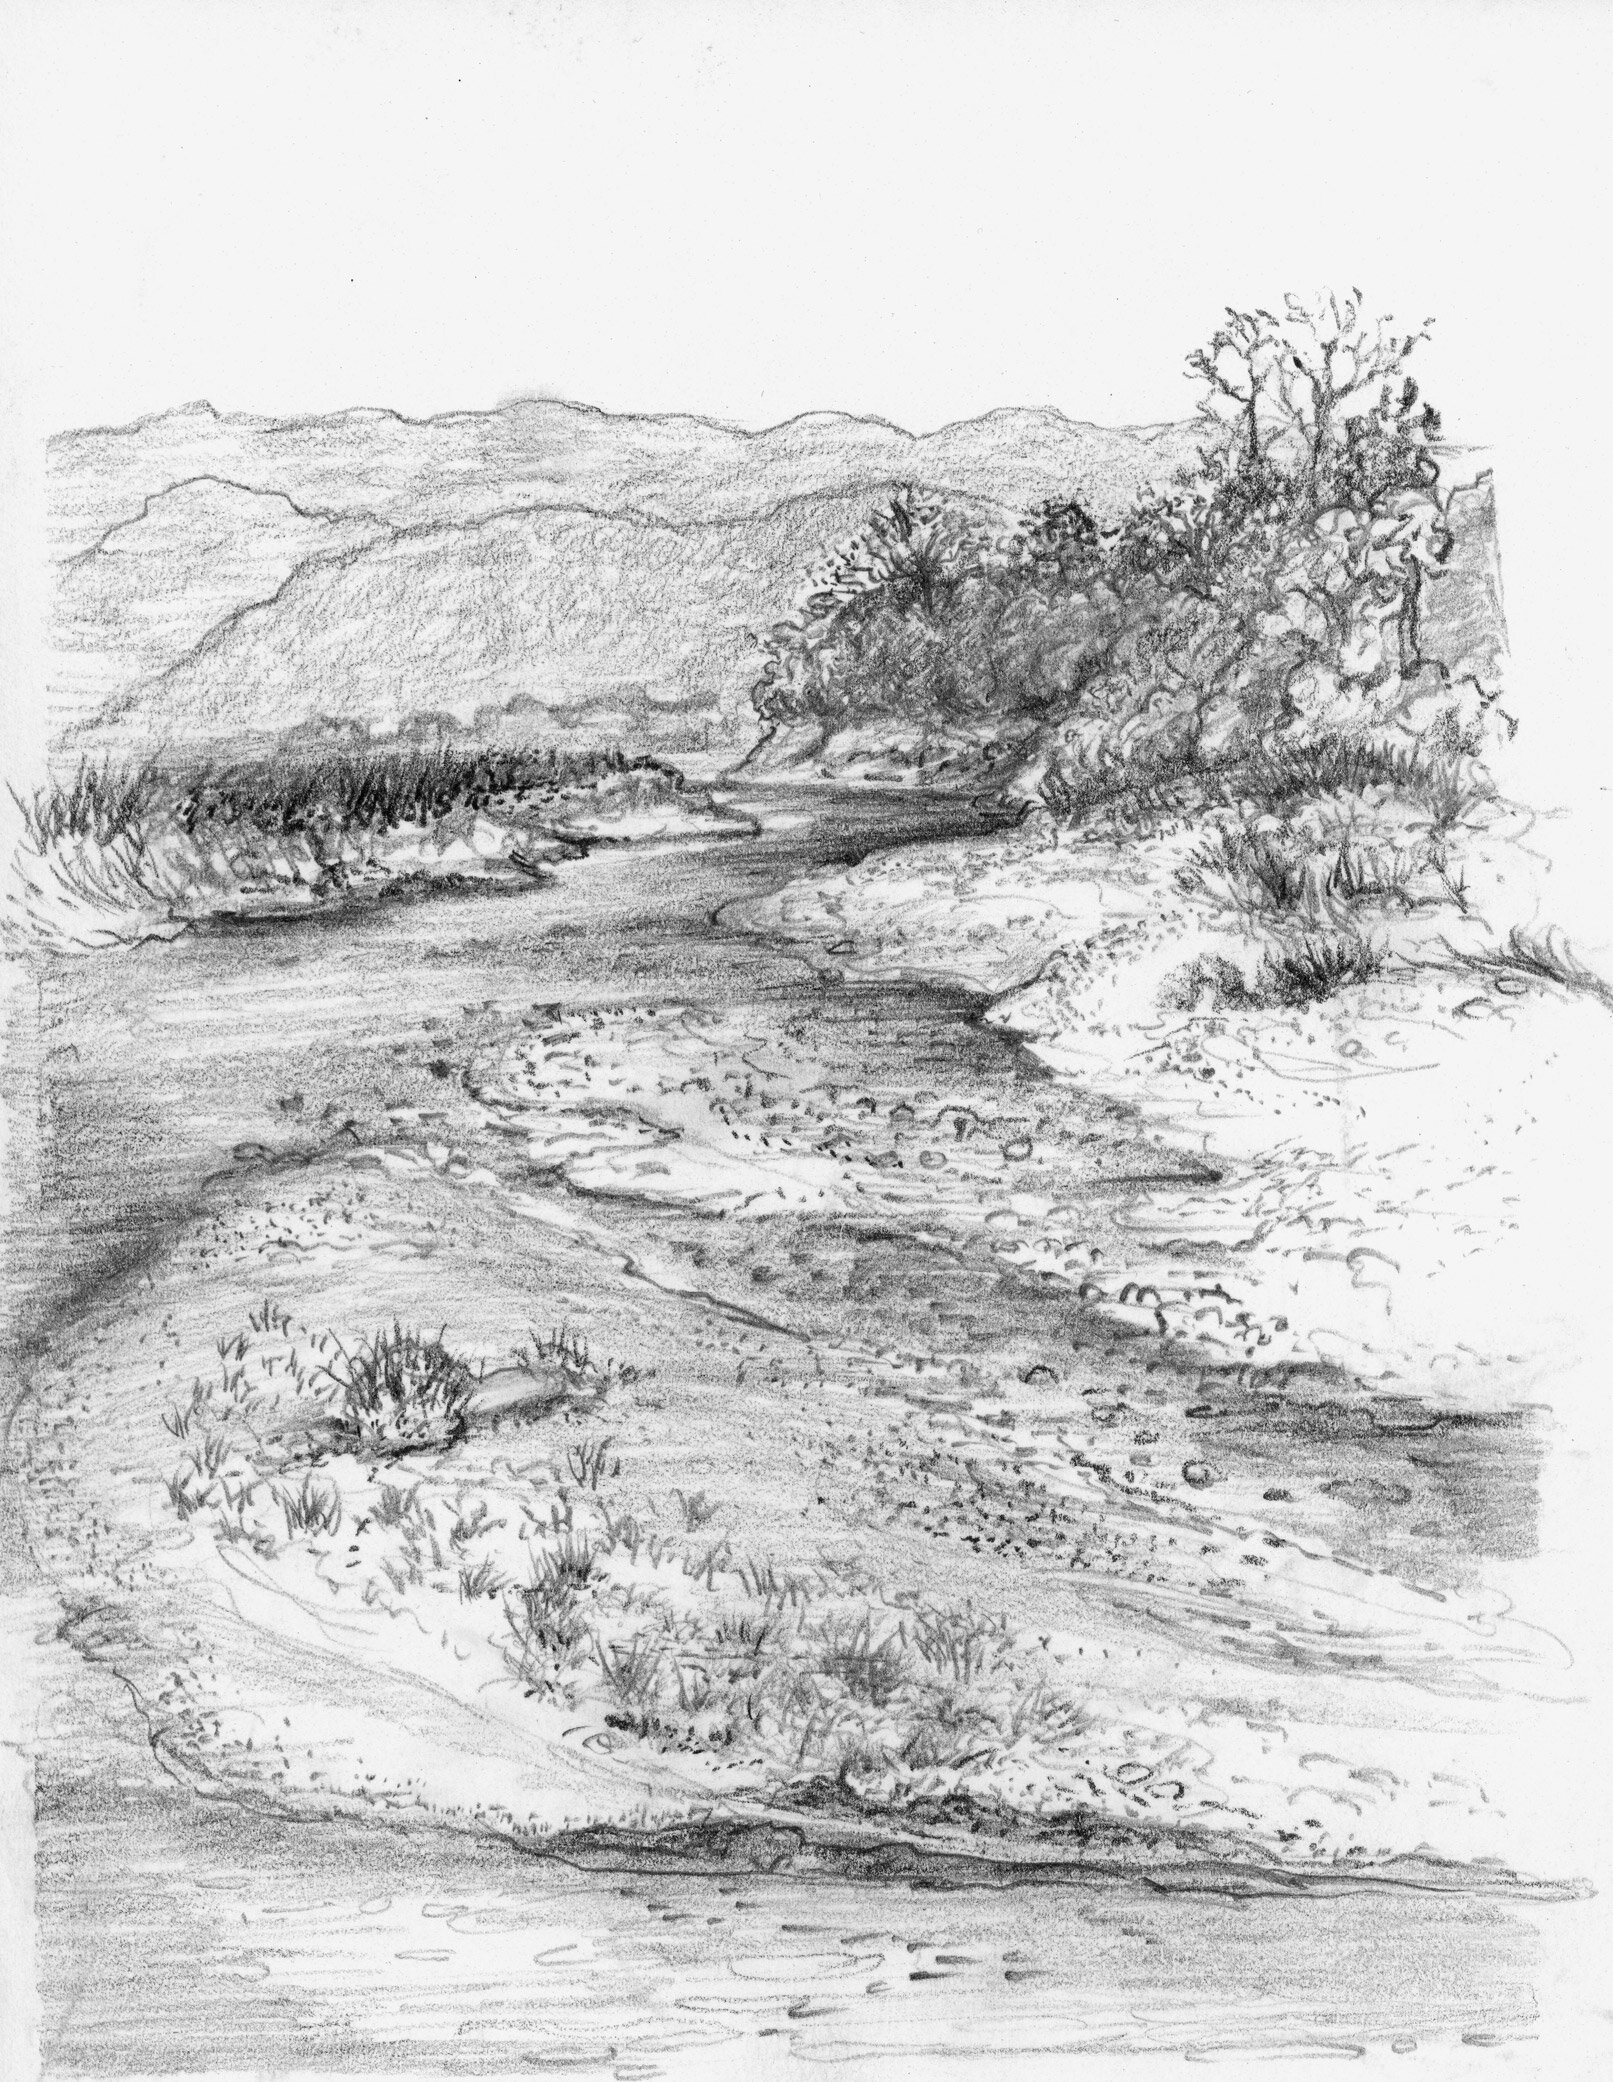   Chitwan Nepal Rapti River  2013 Pencil on paper 6.5x5 inches 